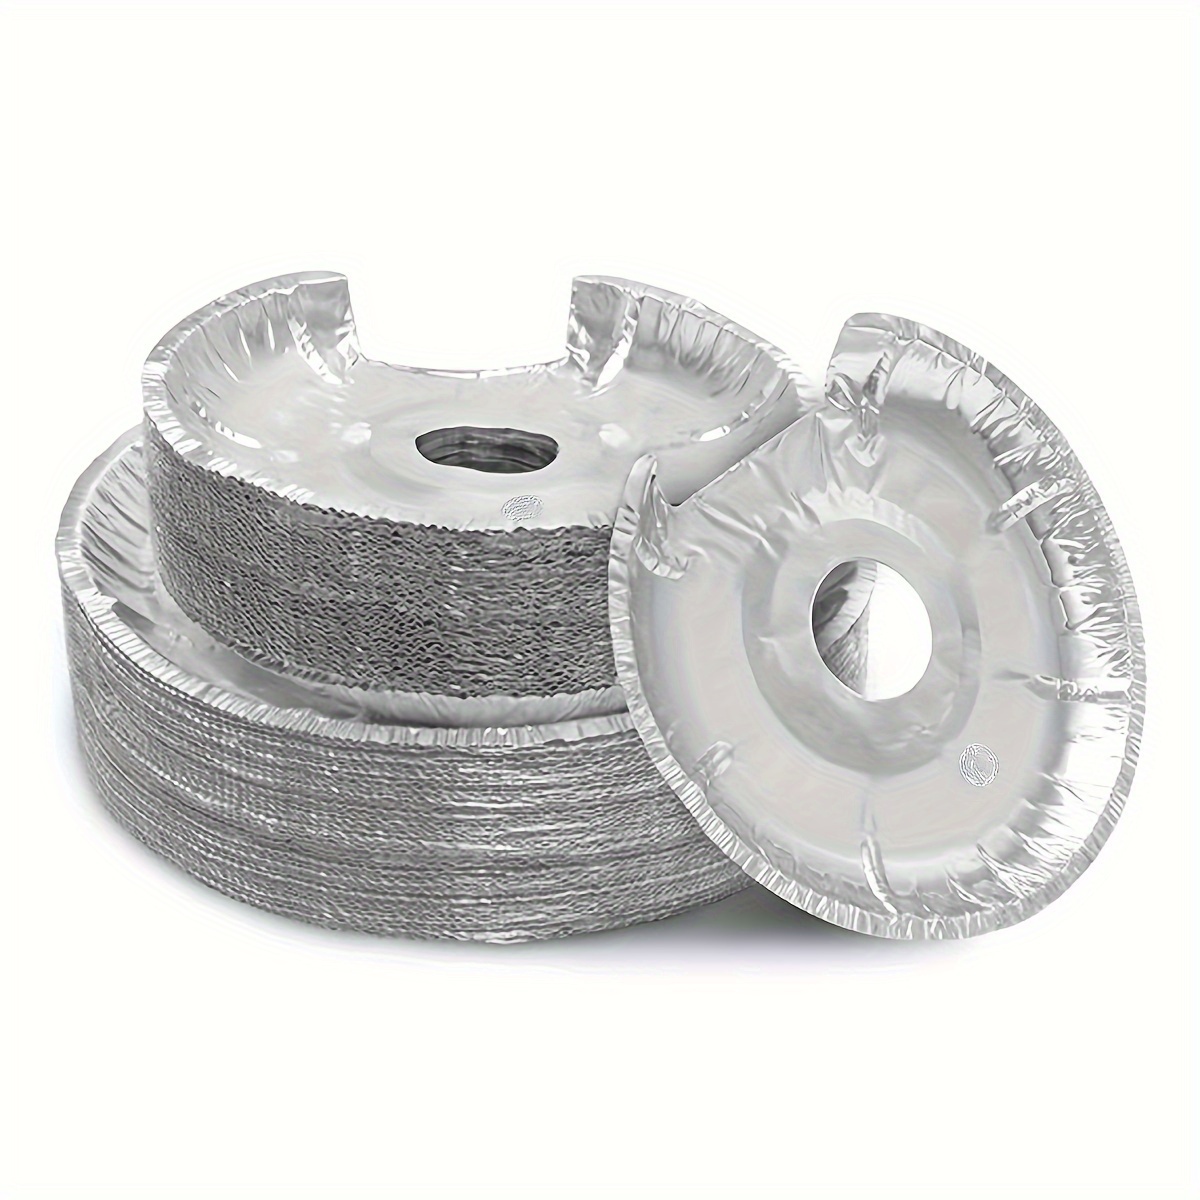 

Disposable Aluminum Foil Drip Pan Liners For Electric Stove Burners - 6 Inch And 8 Inch Sizes To Keep Your Stove Top Clean